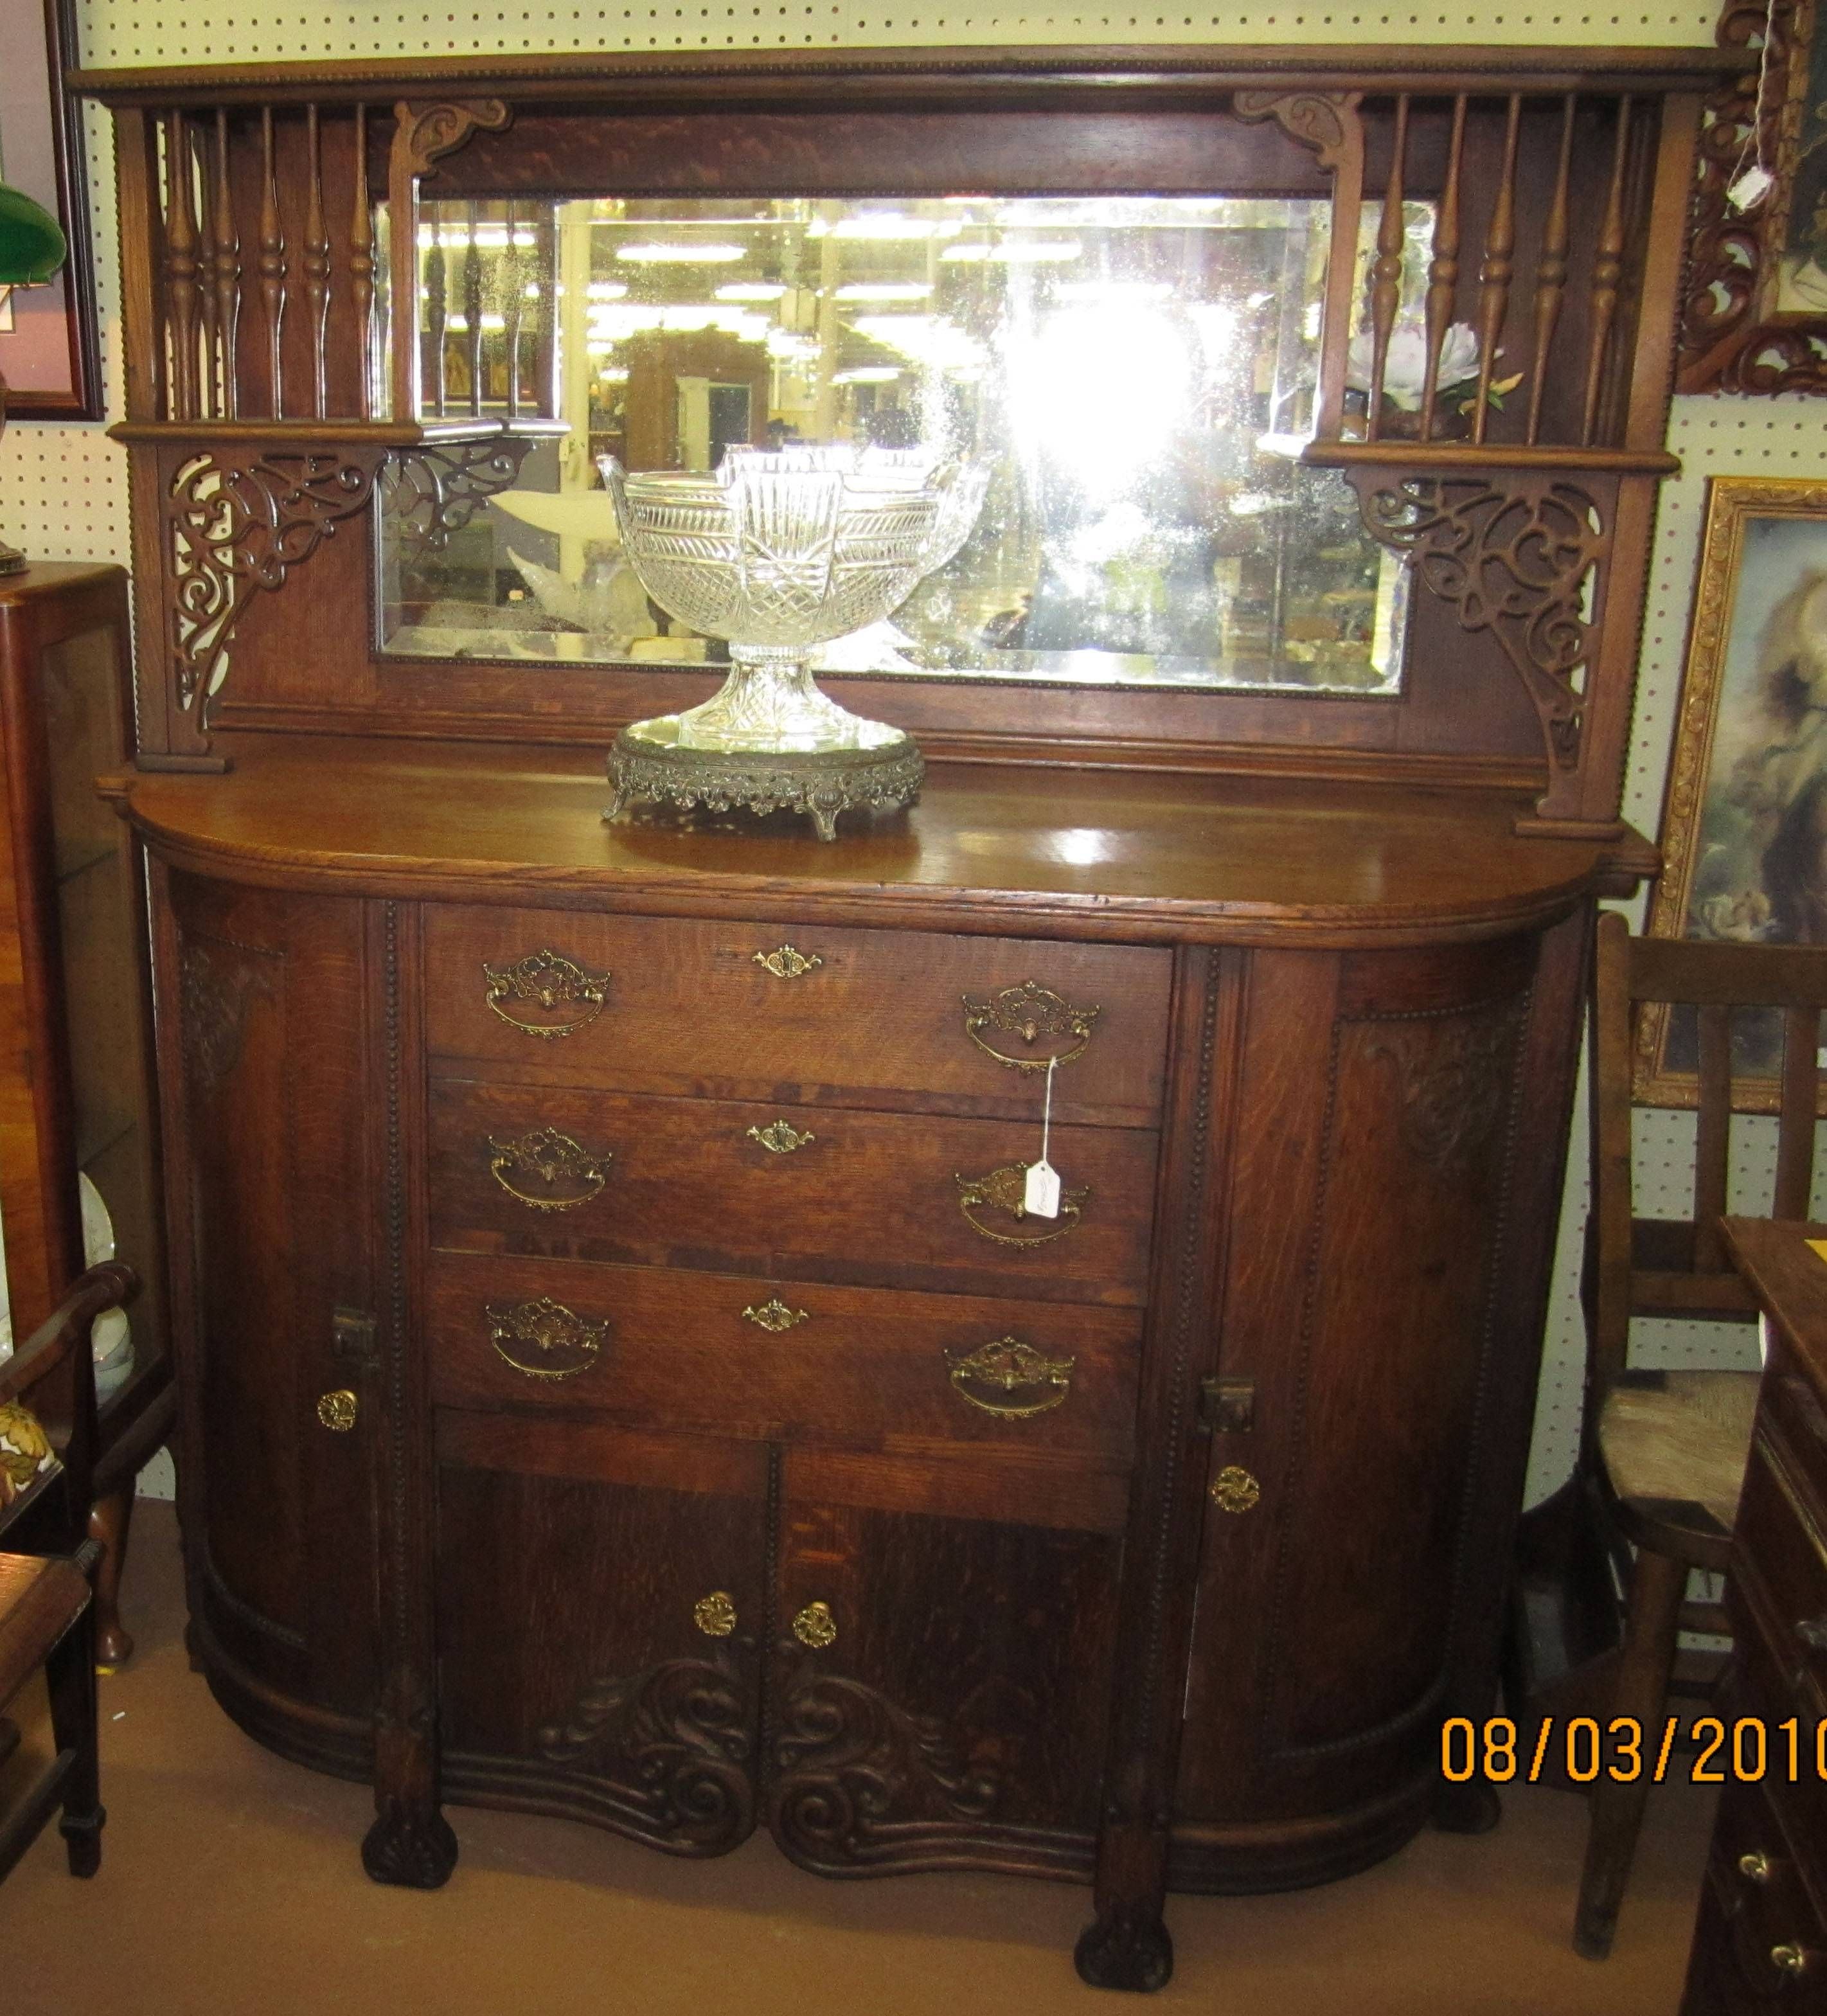 Antiques | Classifieds| Antiques » Antique Furniture » Antique With Regard To Antique Sideboards (View 4 of 15)